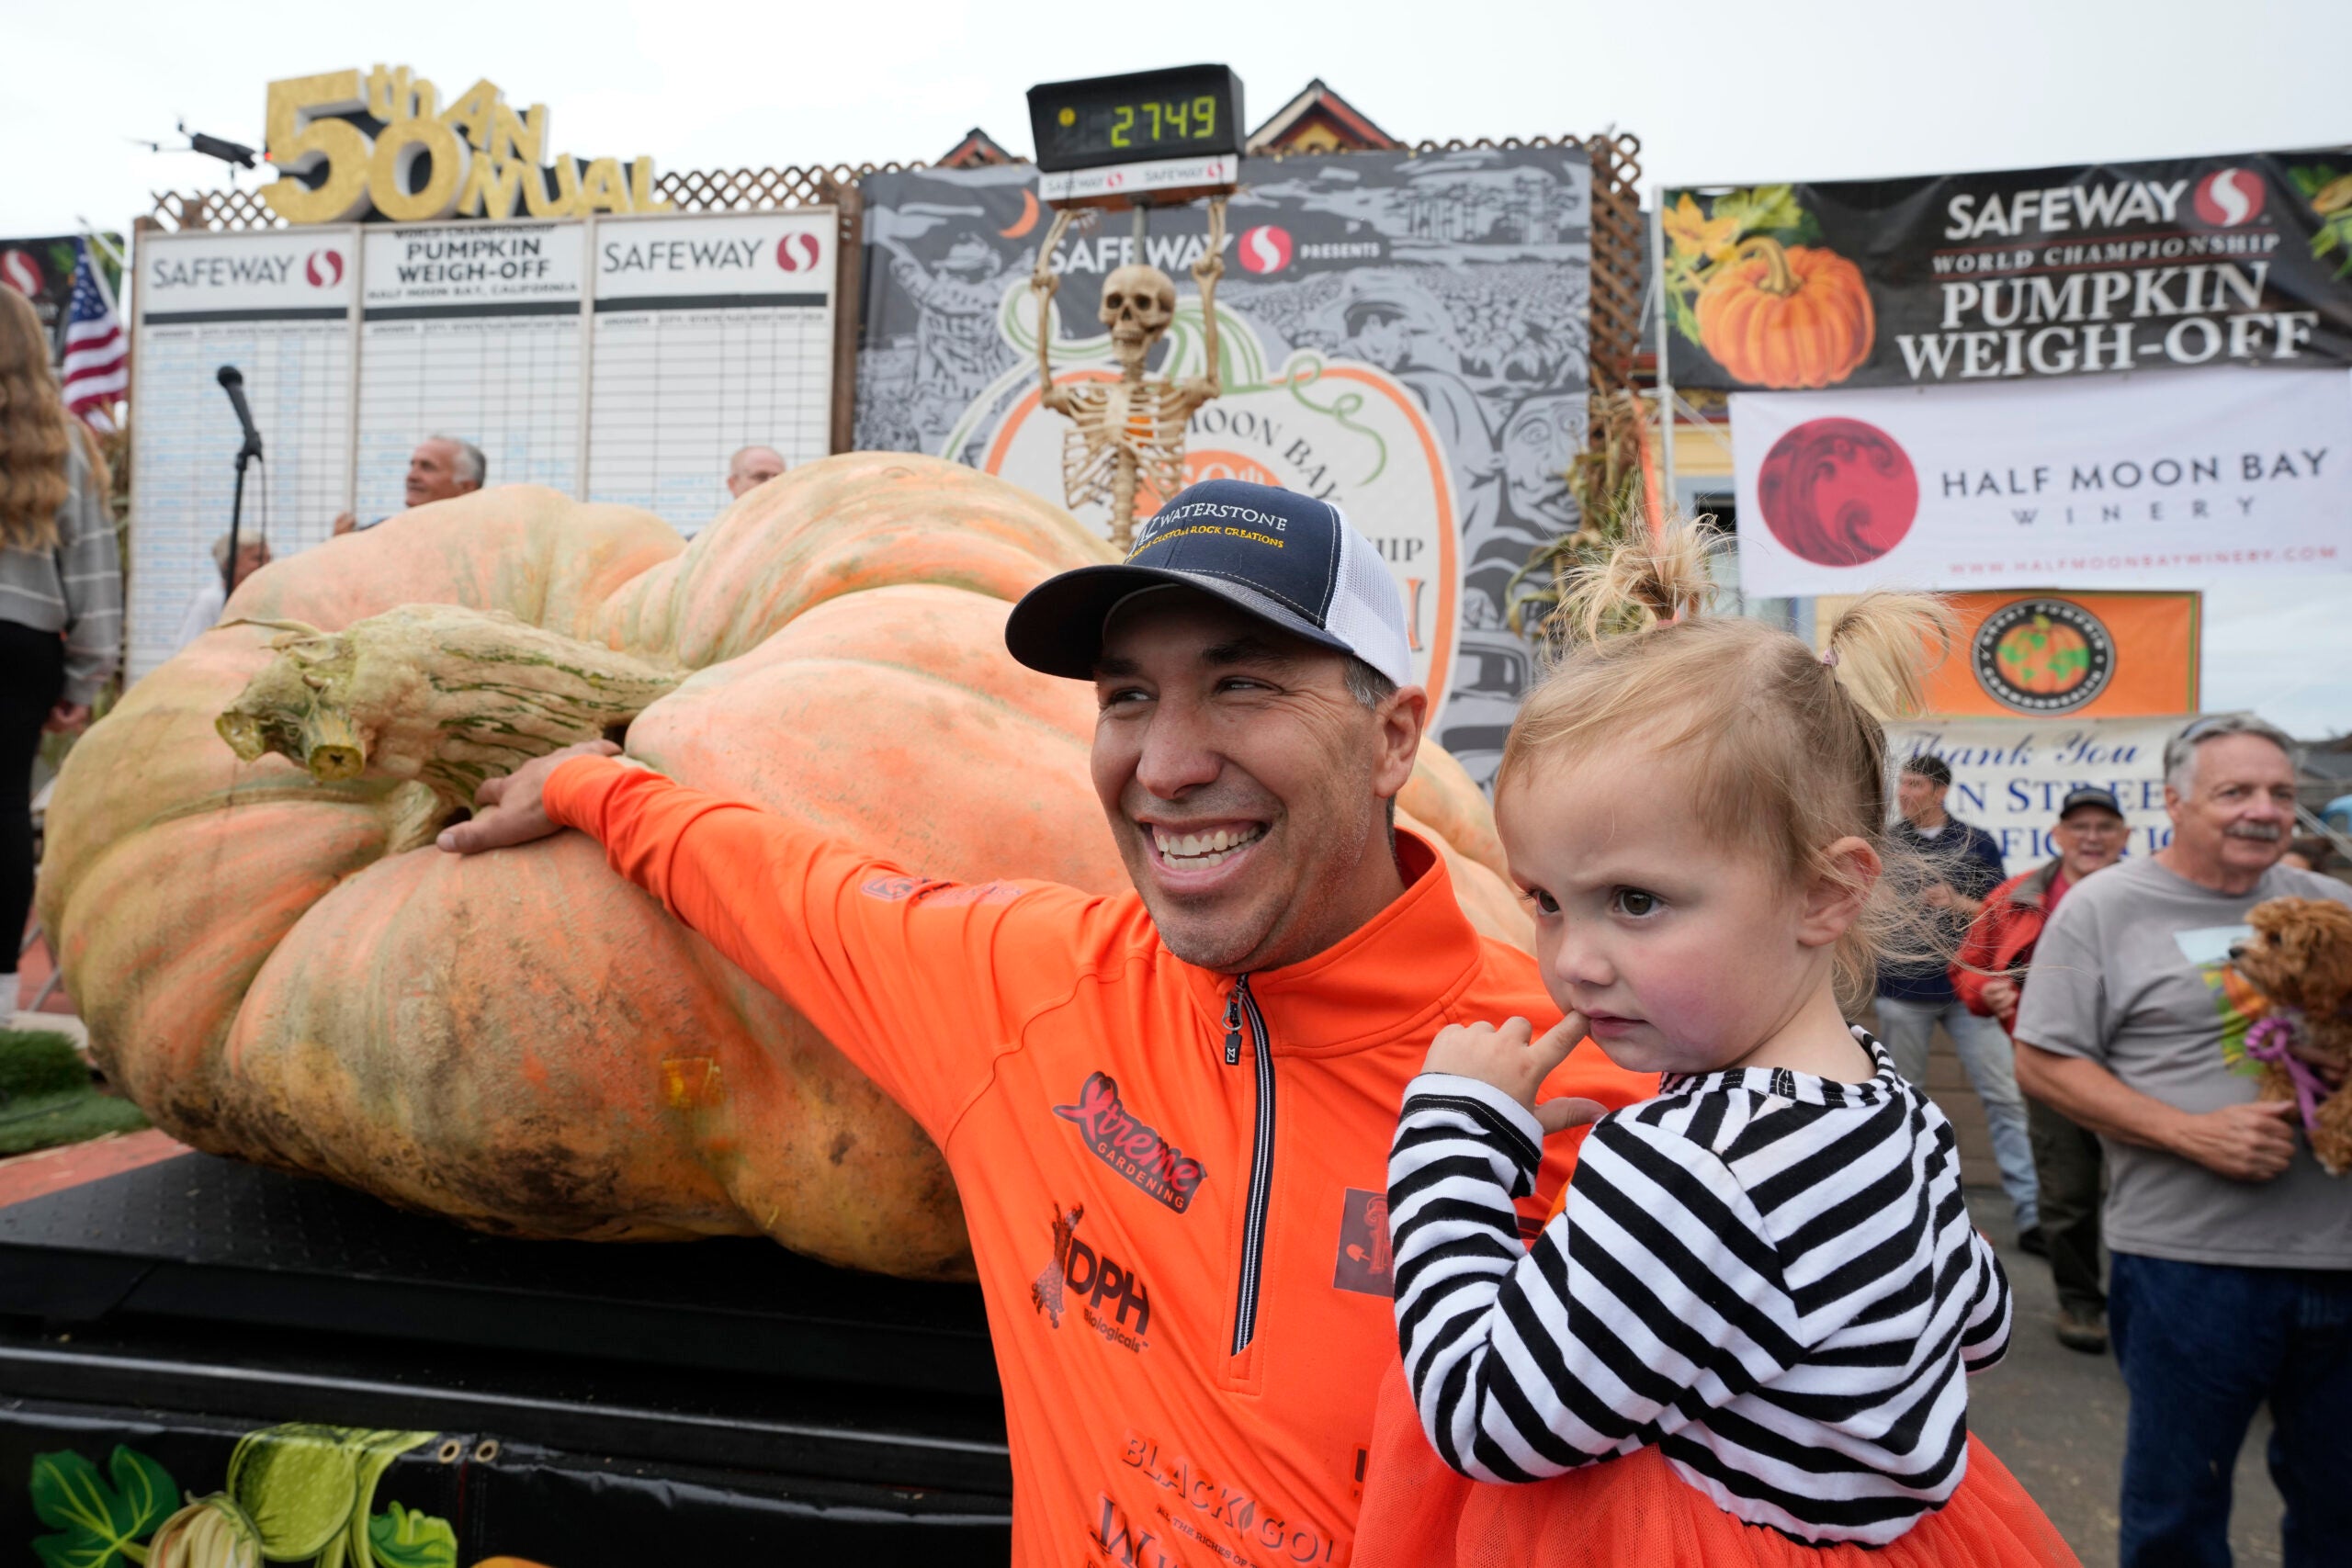 Travis Gienger of Anoka, Minn., holds his two-year-old daughter Lily and poses by his pumpkin called "Michael Jordan" after winning the Safeway 50th annual World Championship Pumpkin Weigh-Off in Half Moon Bay, Calif.